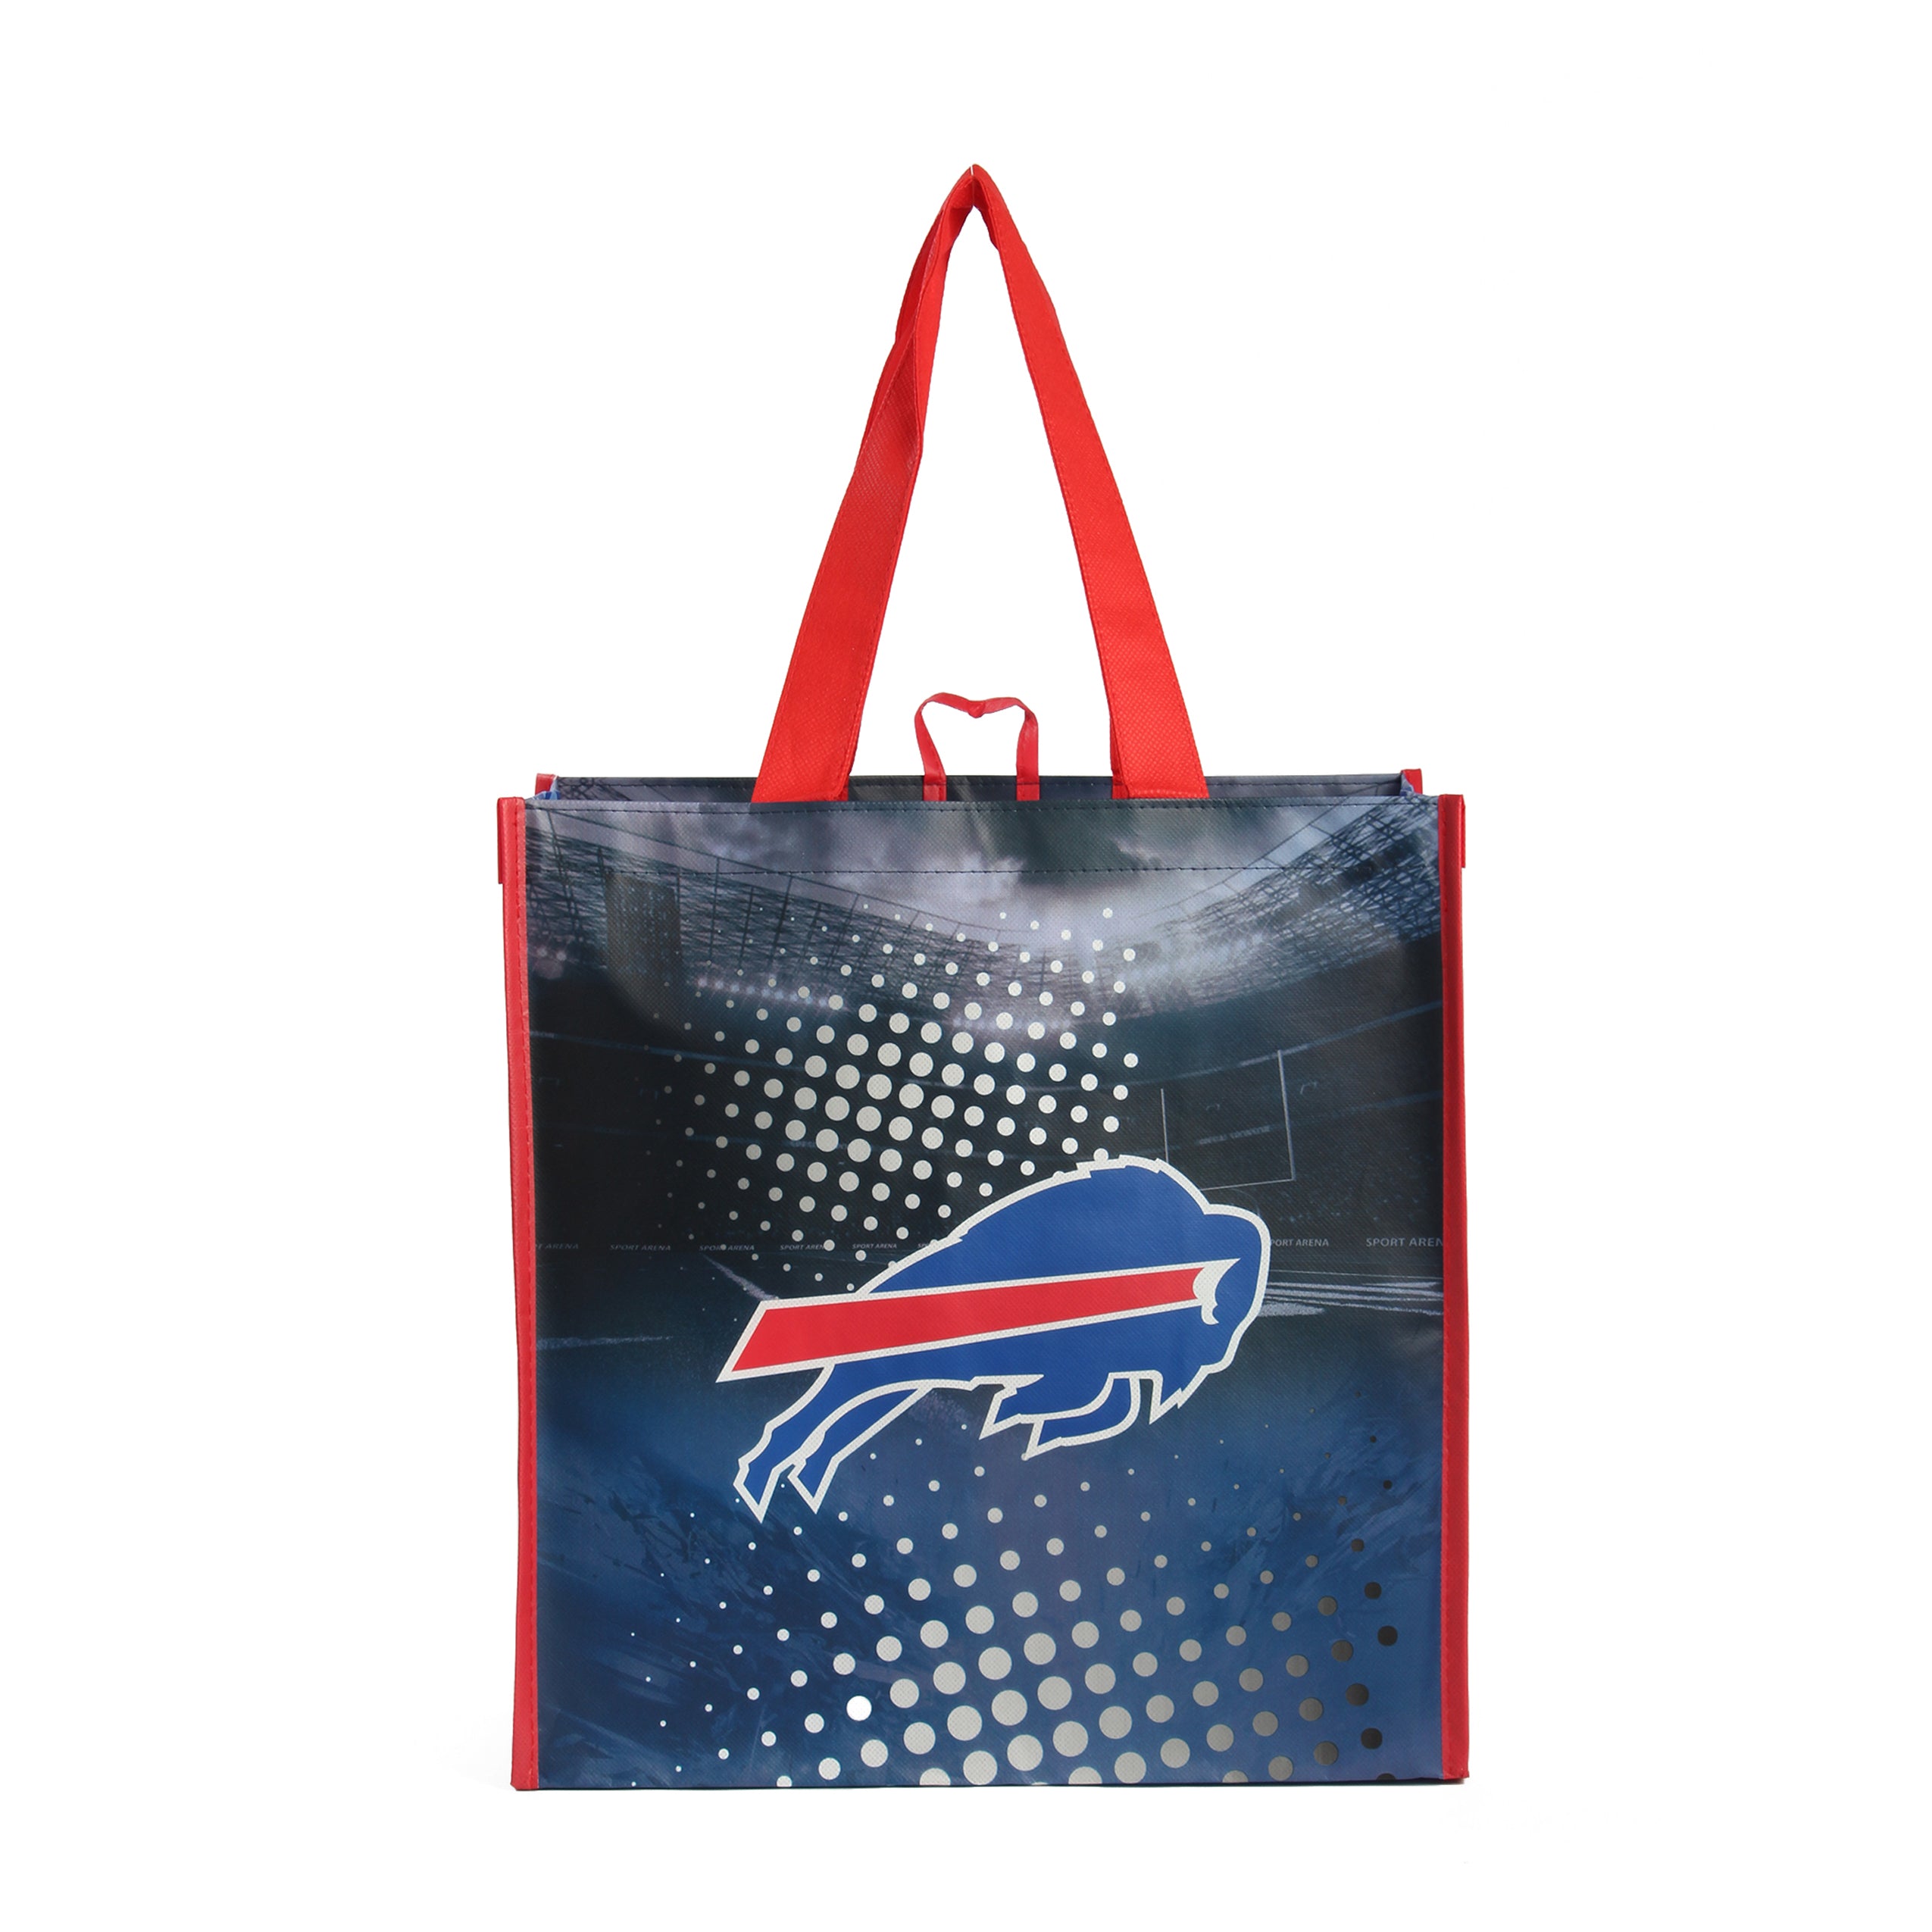 LAMINATED REUSABLE GROCERY BAG WITH BUFFALO BILLS PRINT (50 pcs/case) –  Earthwise Reusable Bags